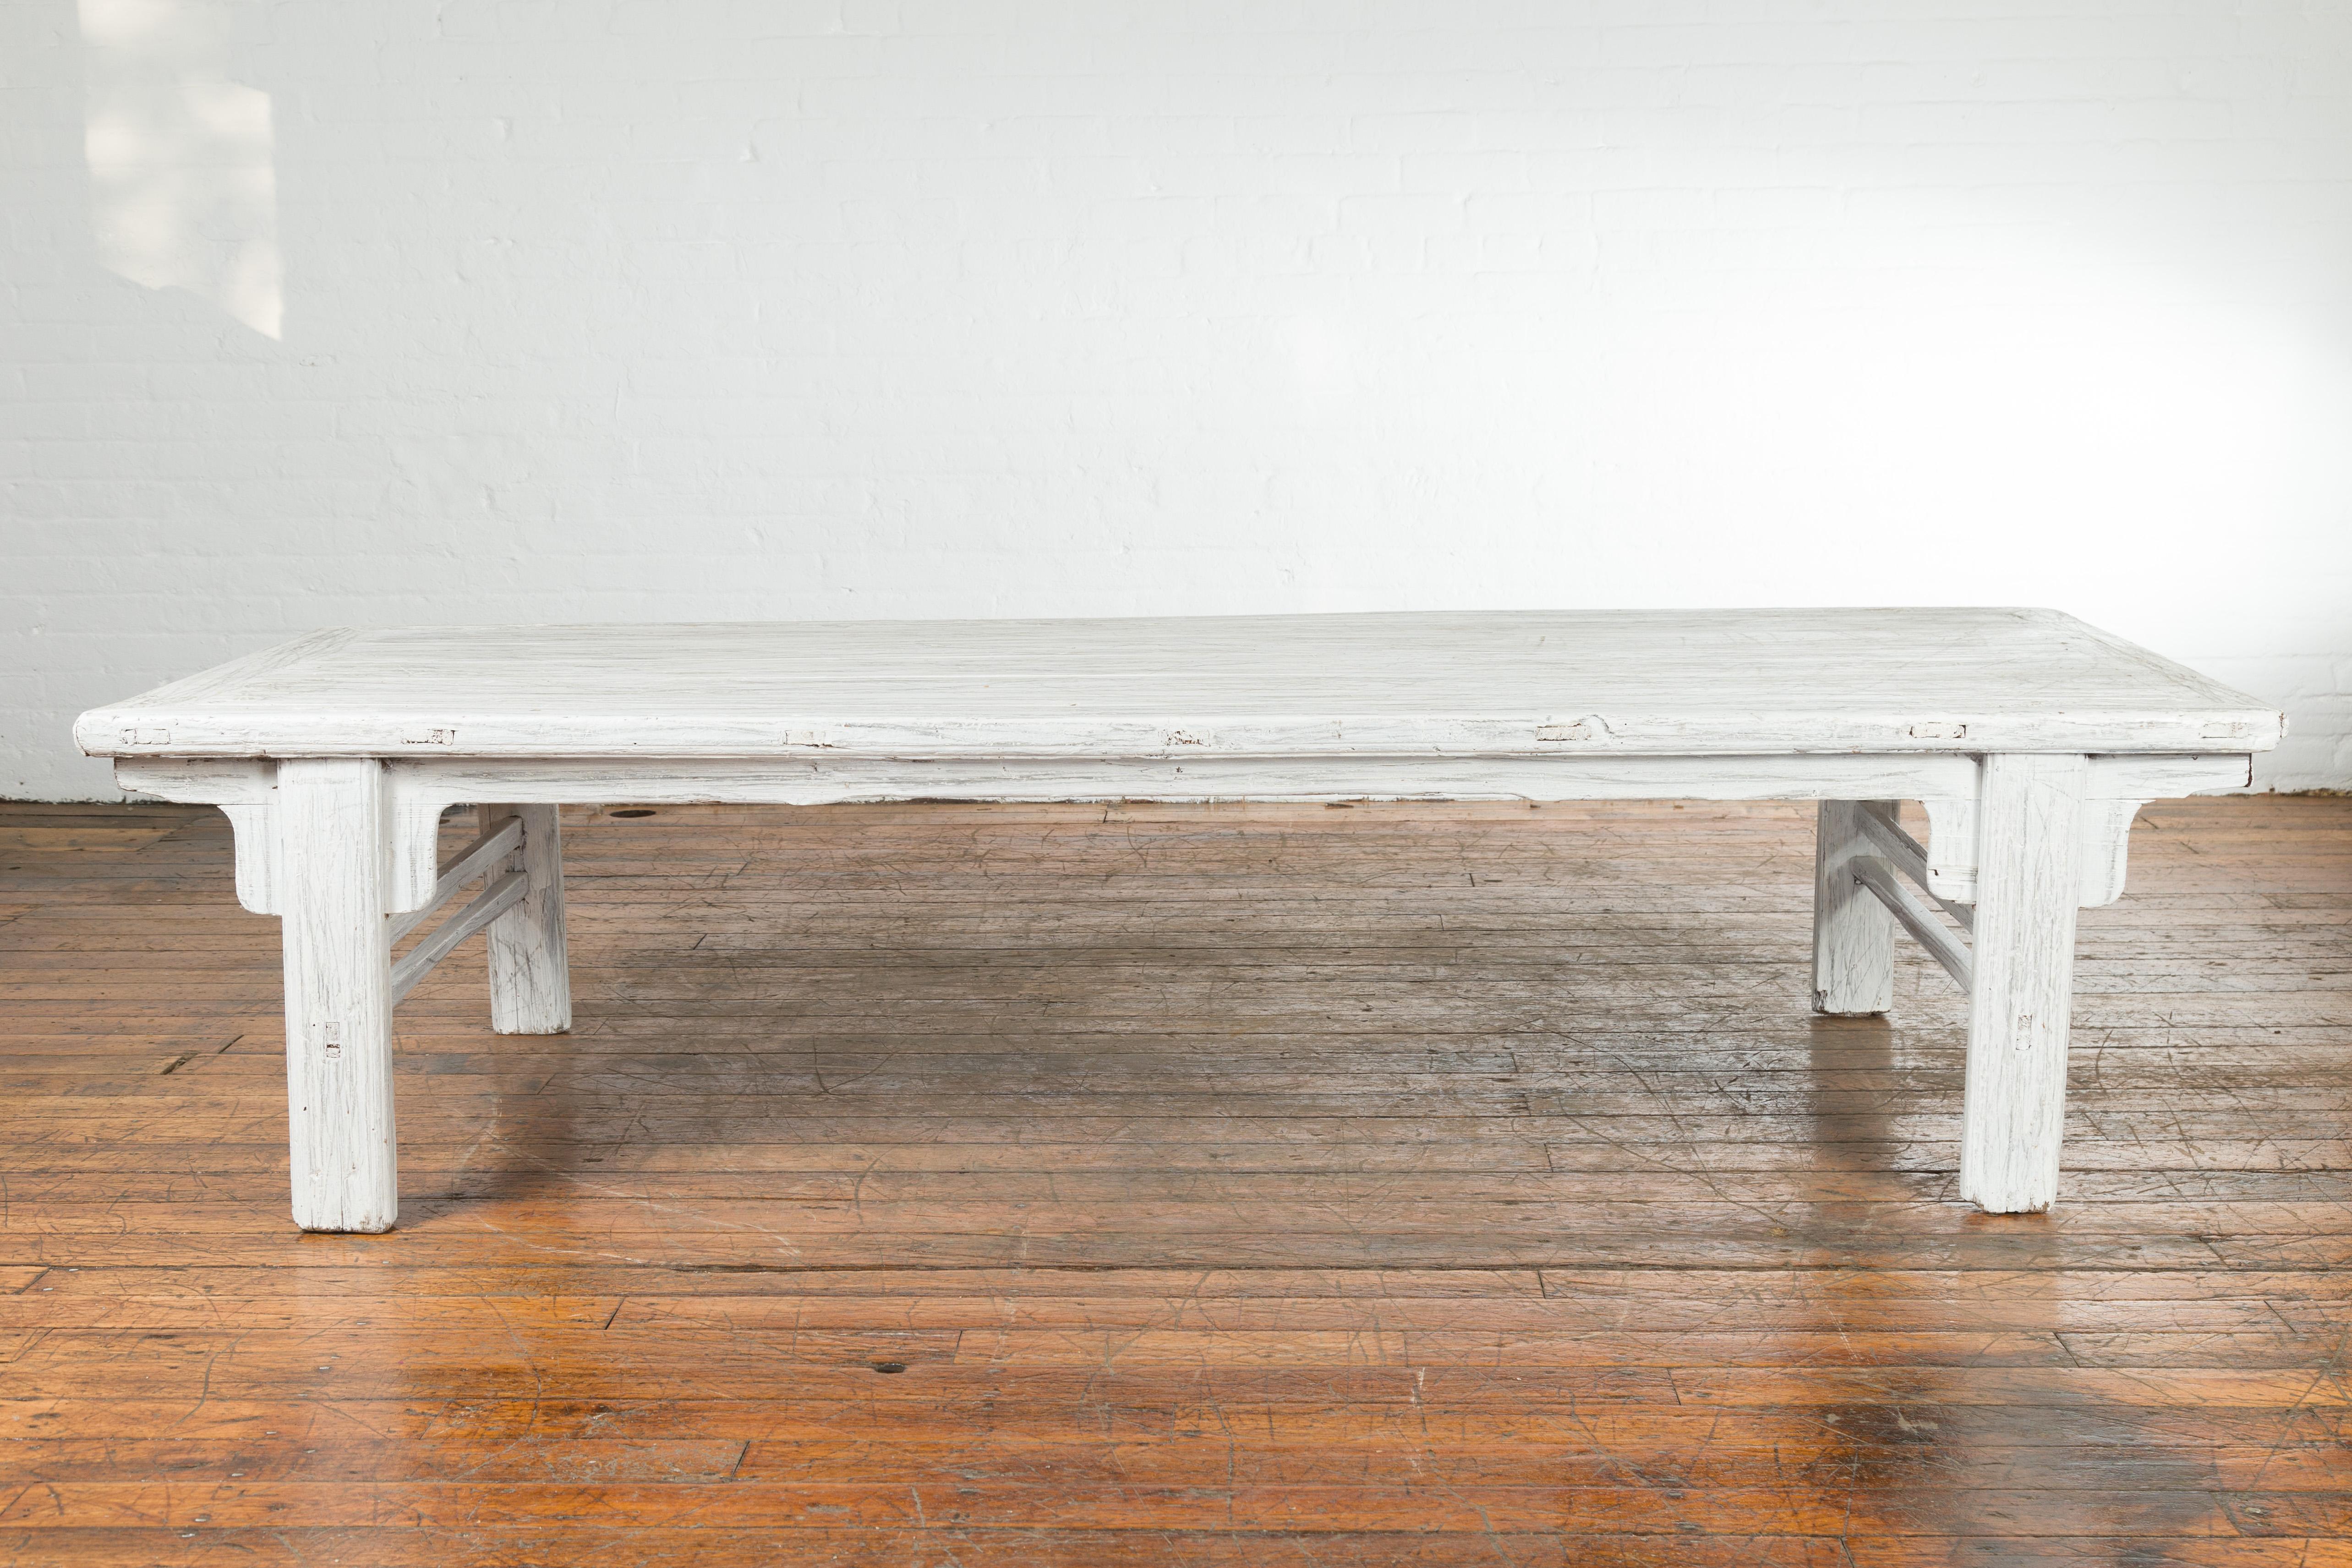 A Chinese vintage whitewashed coffee table from the mid 20th century, with carved spandrels and distressed appearance. Created in China during the midcentury period, this coffee table features a rectangular planked top sitting above a simply carved